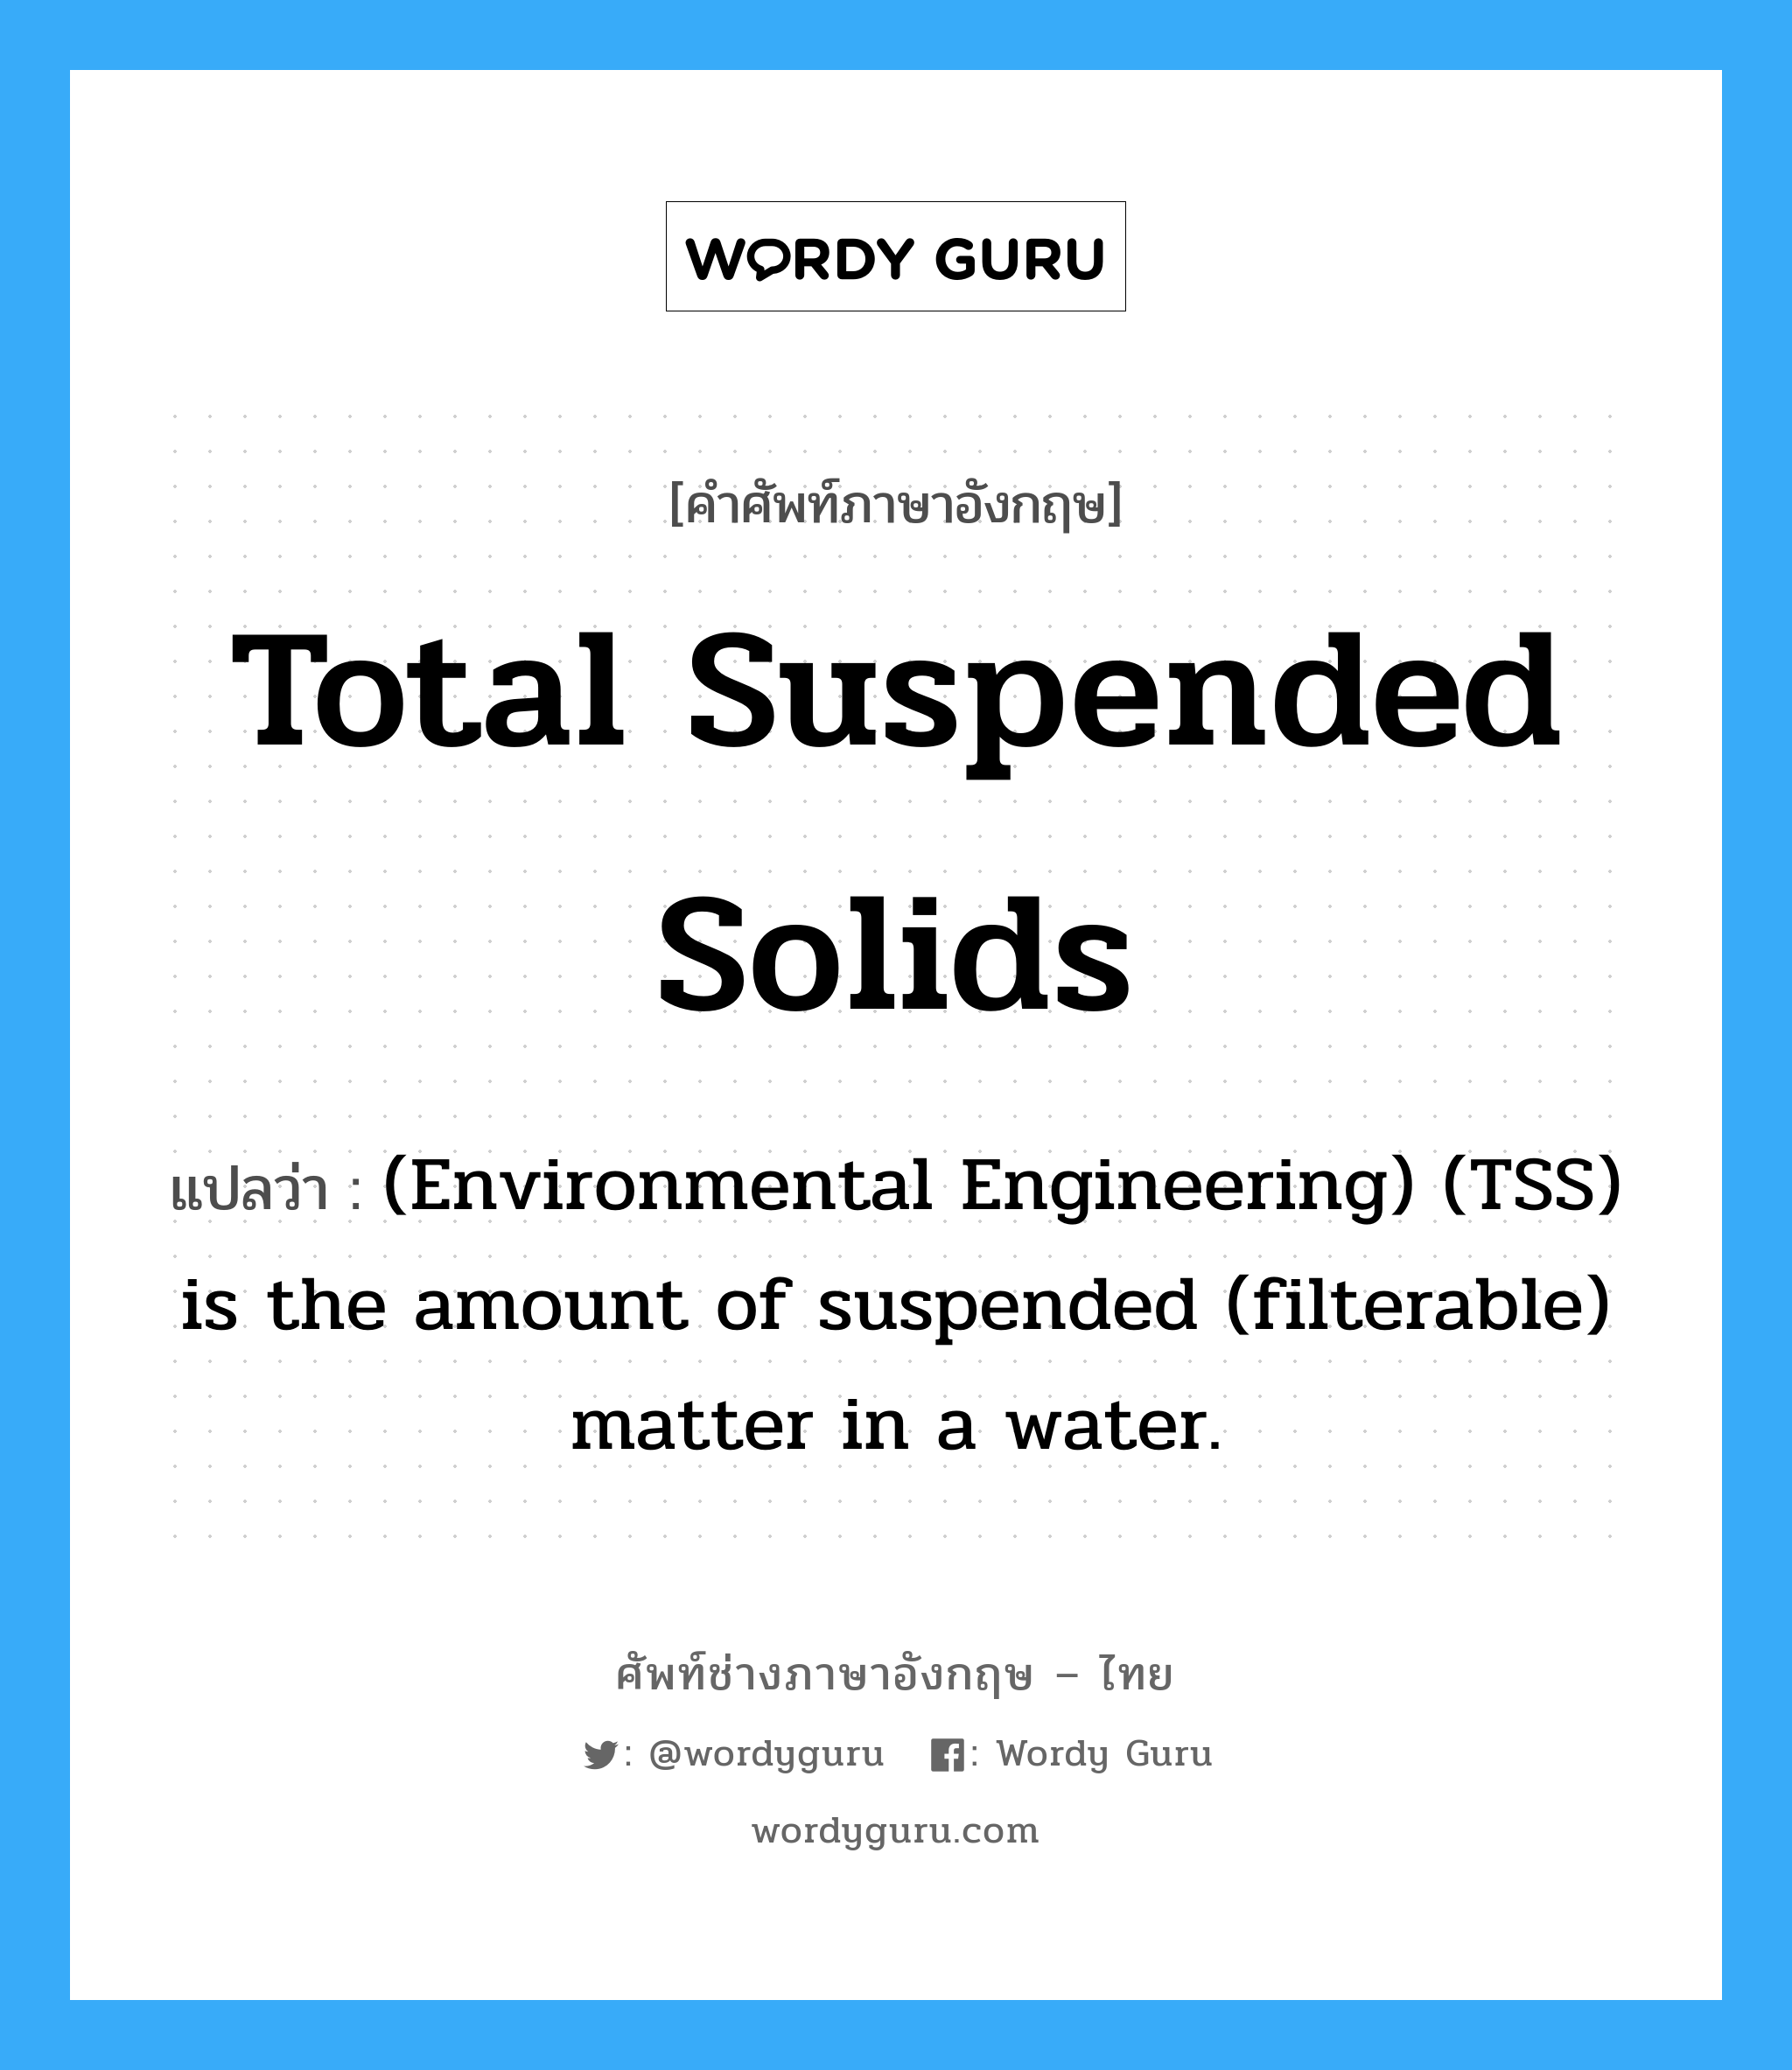 (Environmental Engineering) (TSS) is the amount of suspended (filterable) matter in a water. ภาษาอังกฤษ?, คำศัพท์ช่างภาษาอังกฤษ - ไทย (Environmental Engineering) (TSS) is the amount of suspended (filterable) matter in a water. คำศัพท์ภาษาอังกฤษ (Environmental Engineering) (TSS) is the amount of suspended (filterable) matter in a water. แปลว่า Total suspended solids